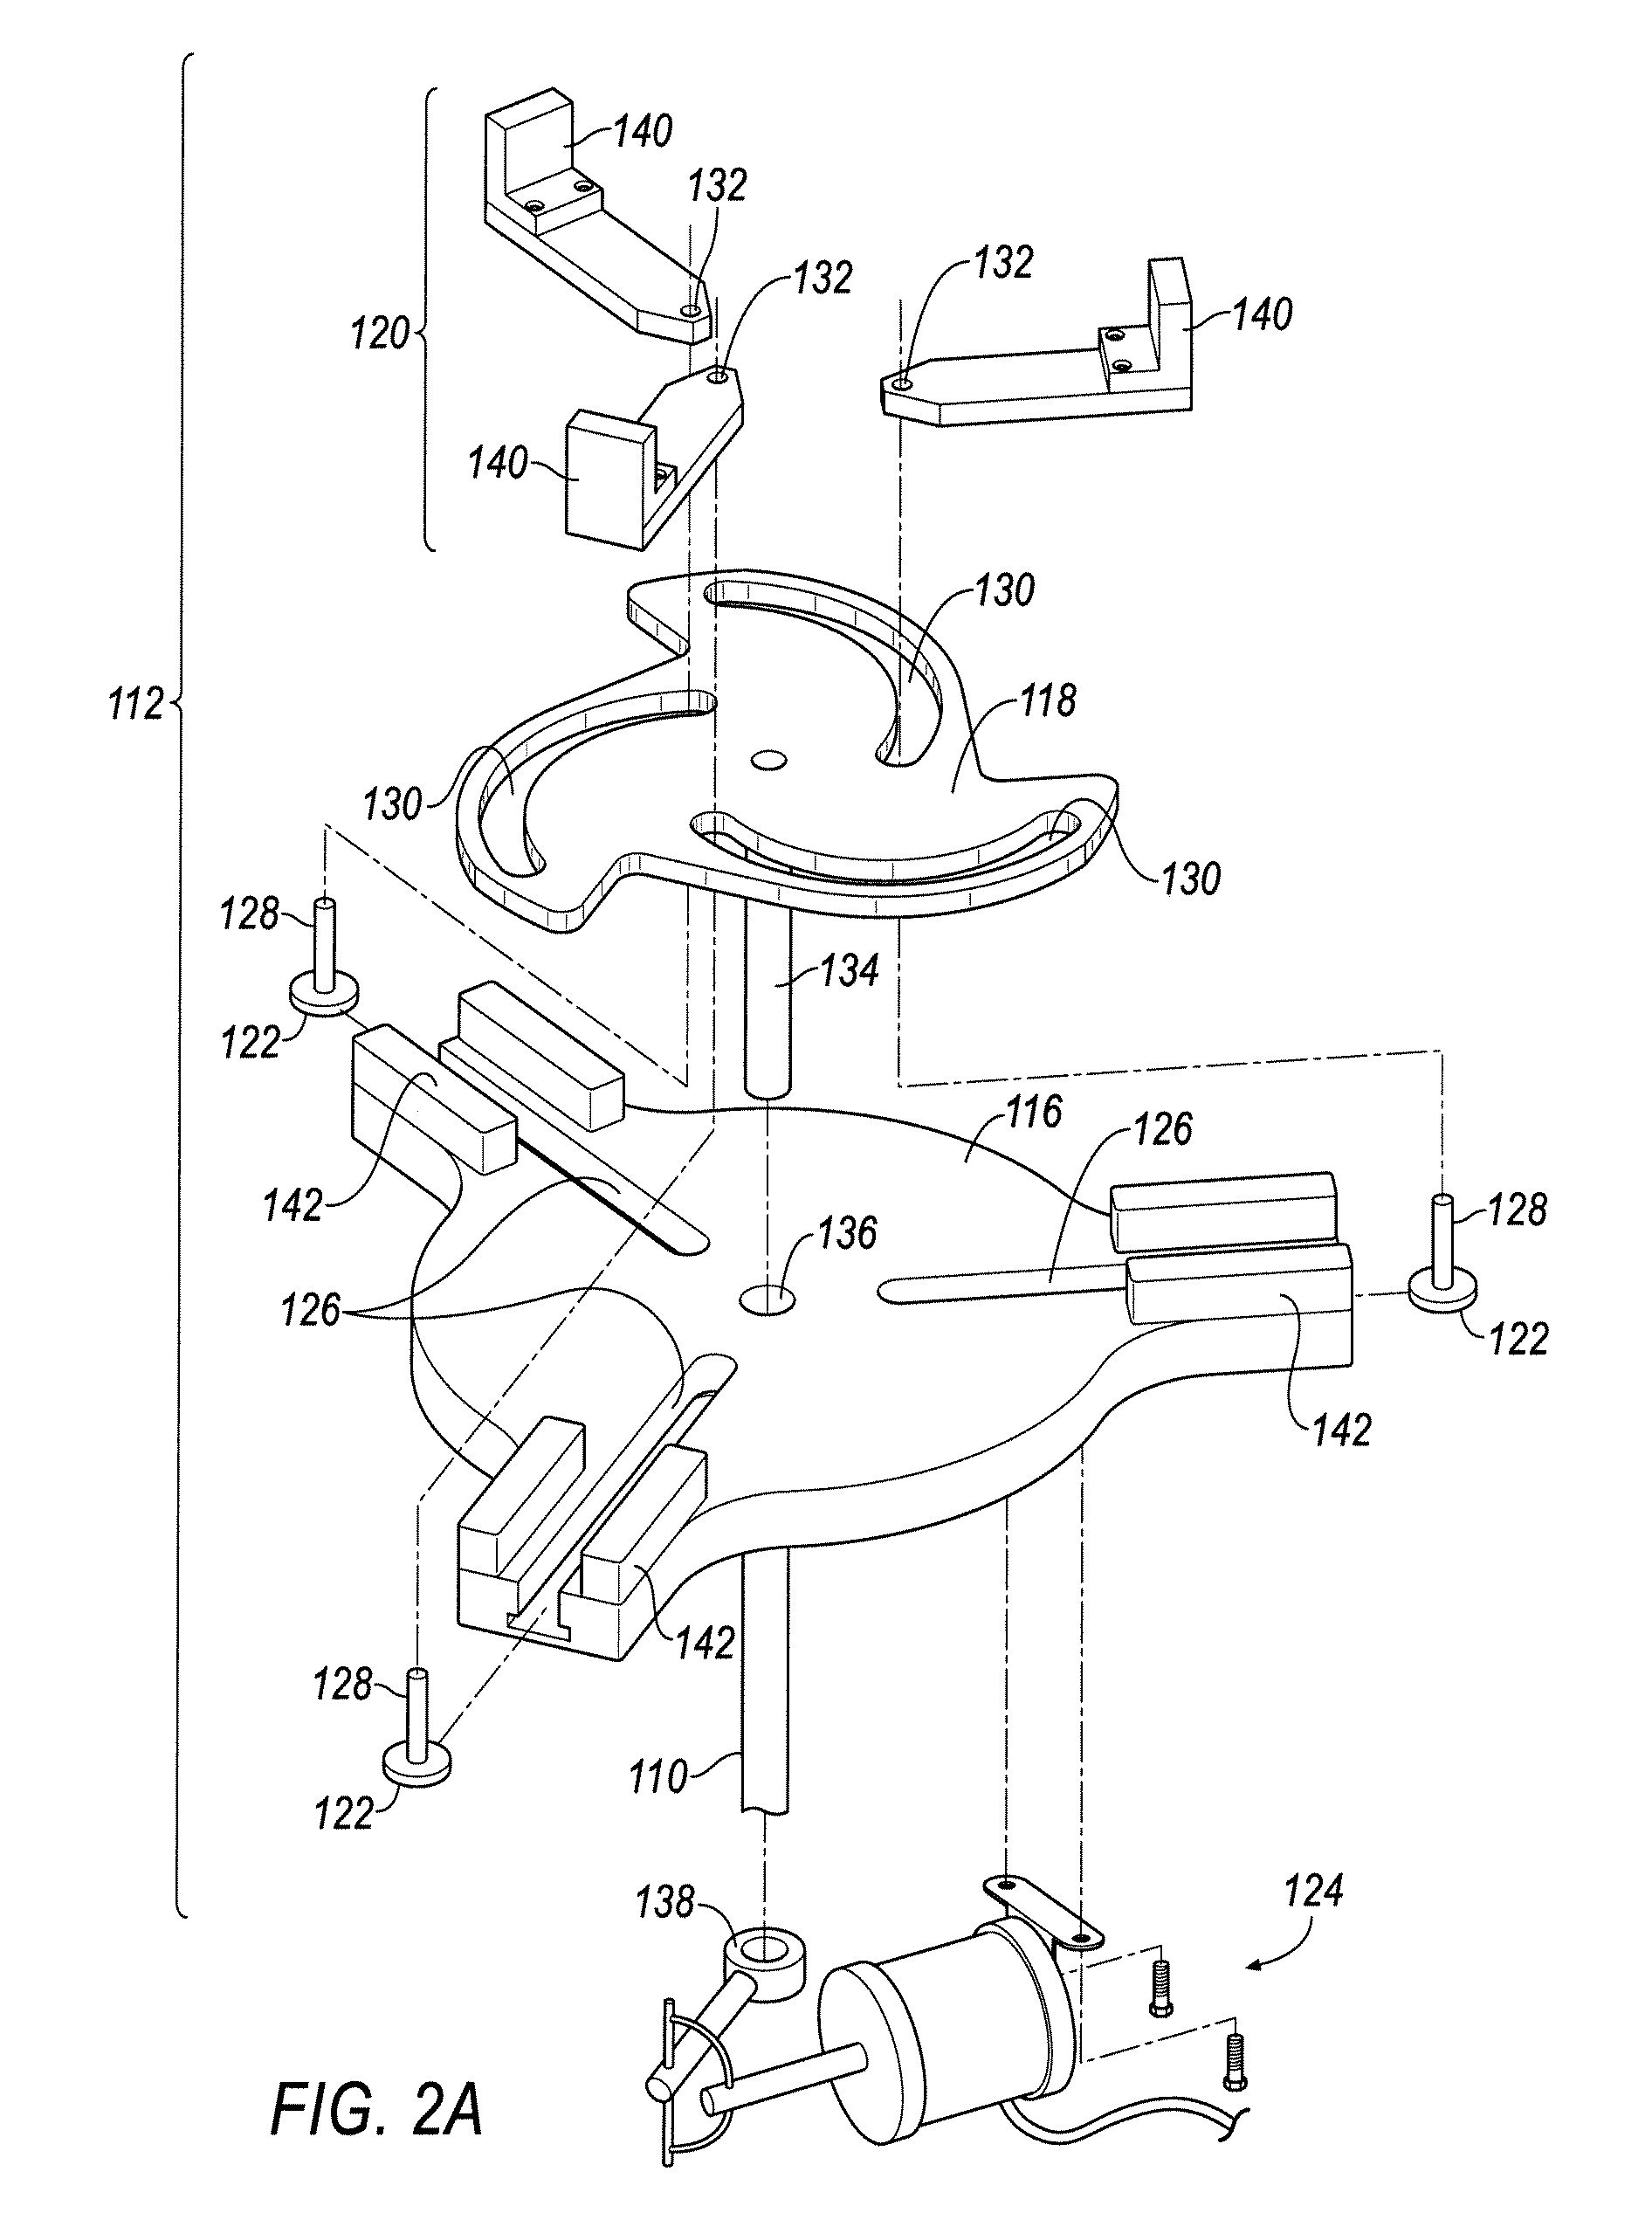 Method and Apparatus for Retaining a Wheel